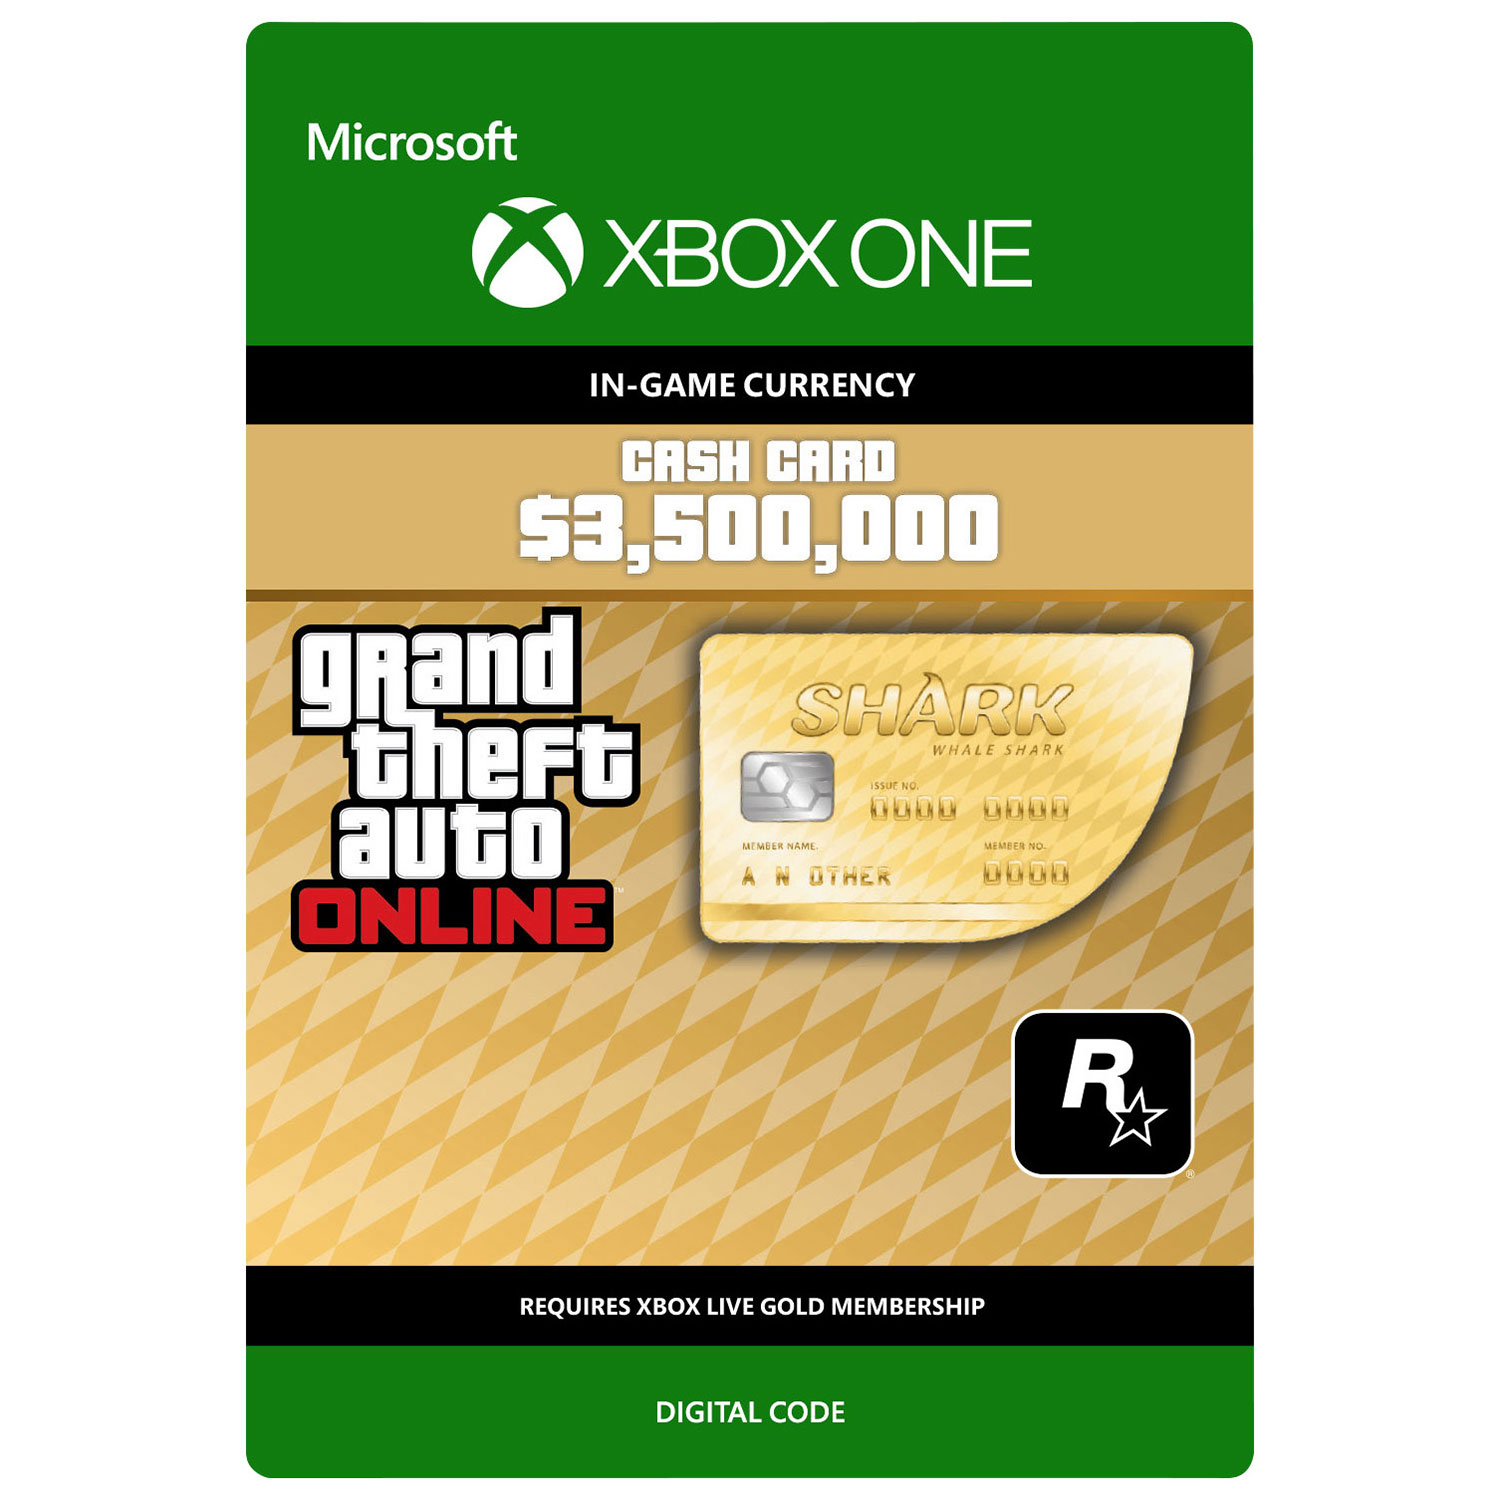 Grand Theft Auto Online $3,500,000 Cash Card Digital Download (Xbox One)